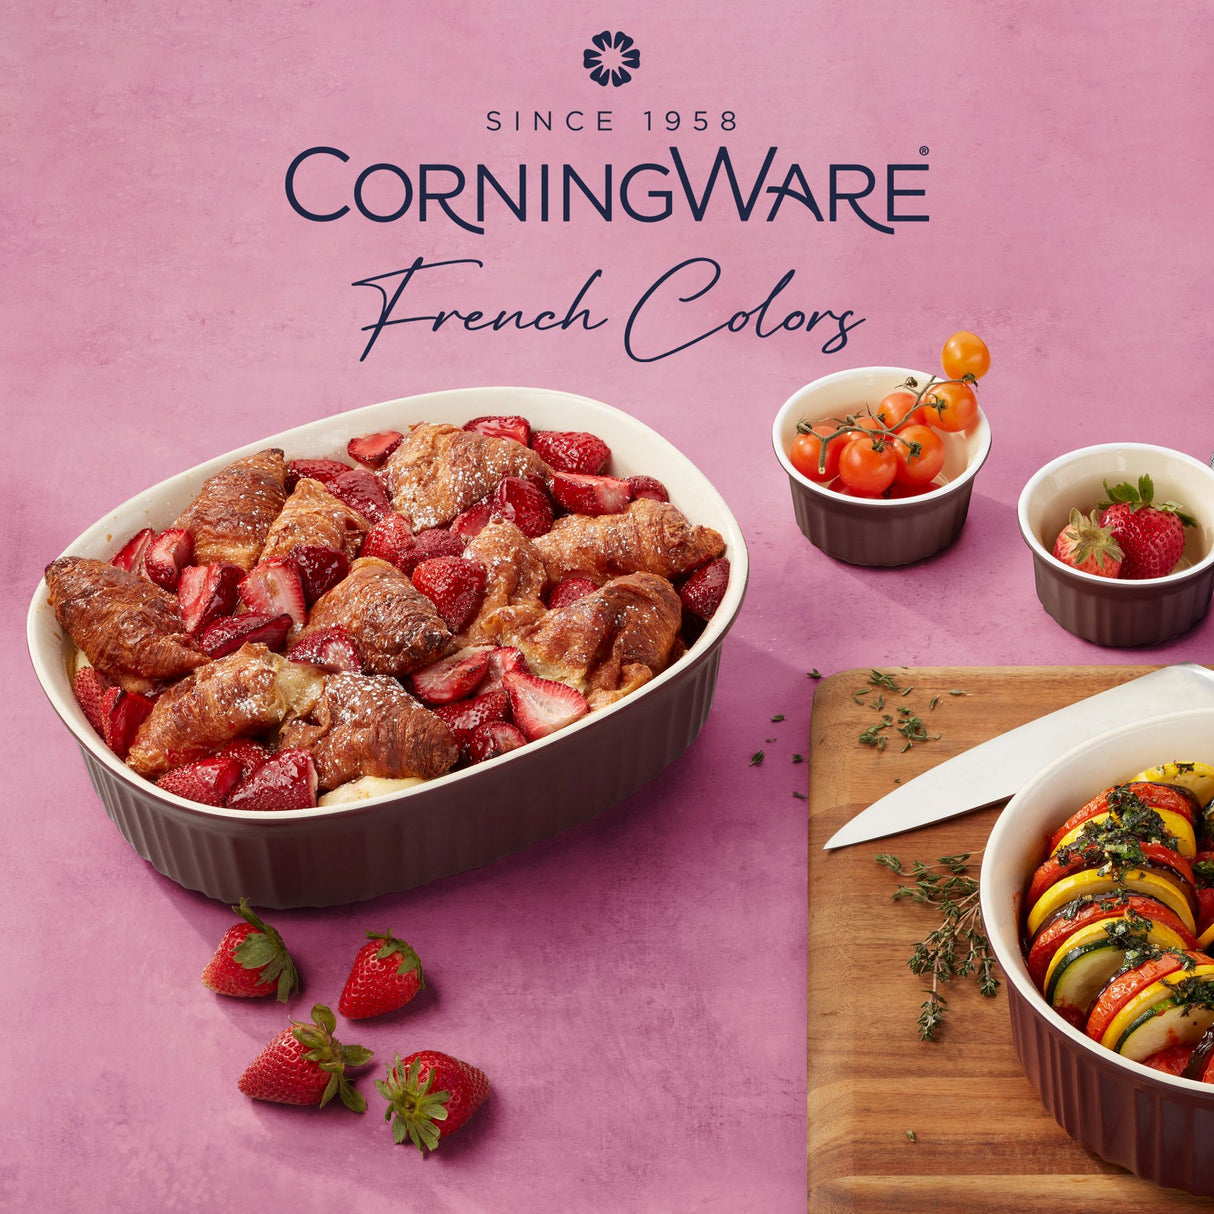  French Colors Bakeware, Cabernet with food inside and text on photo CorningWare French Colors